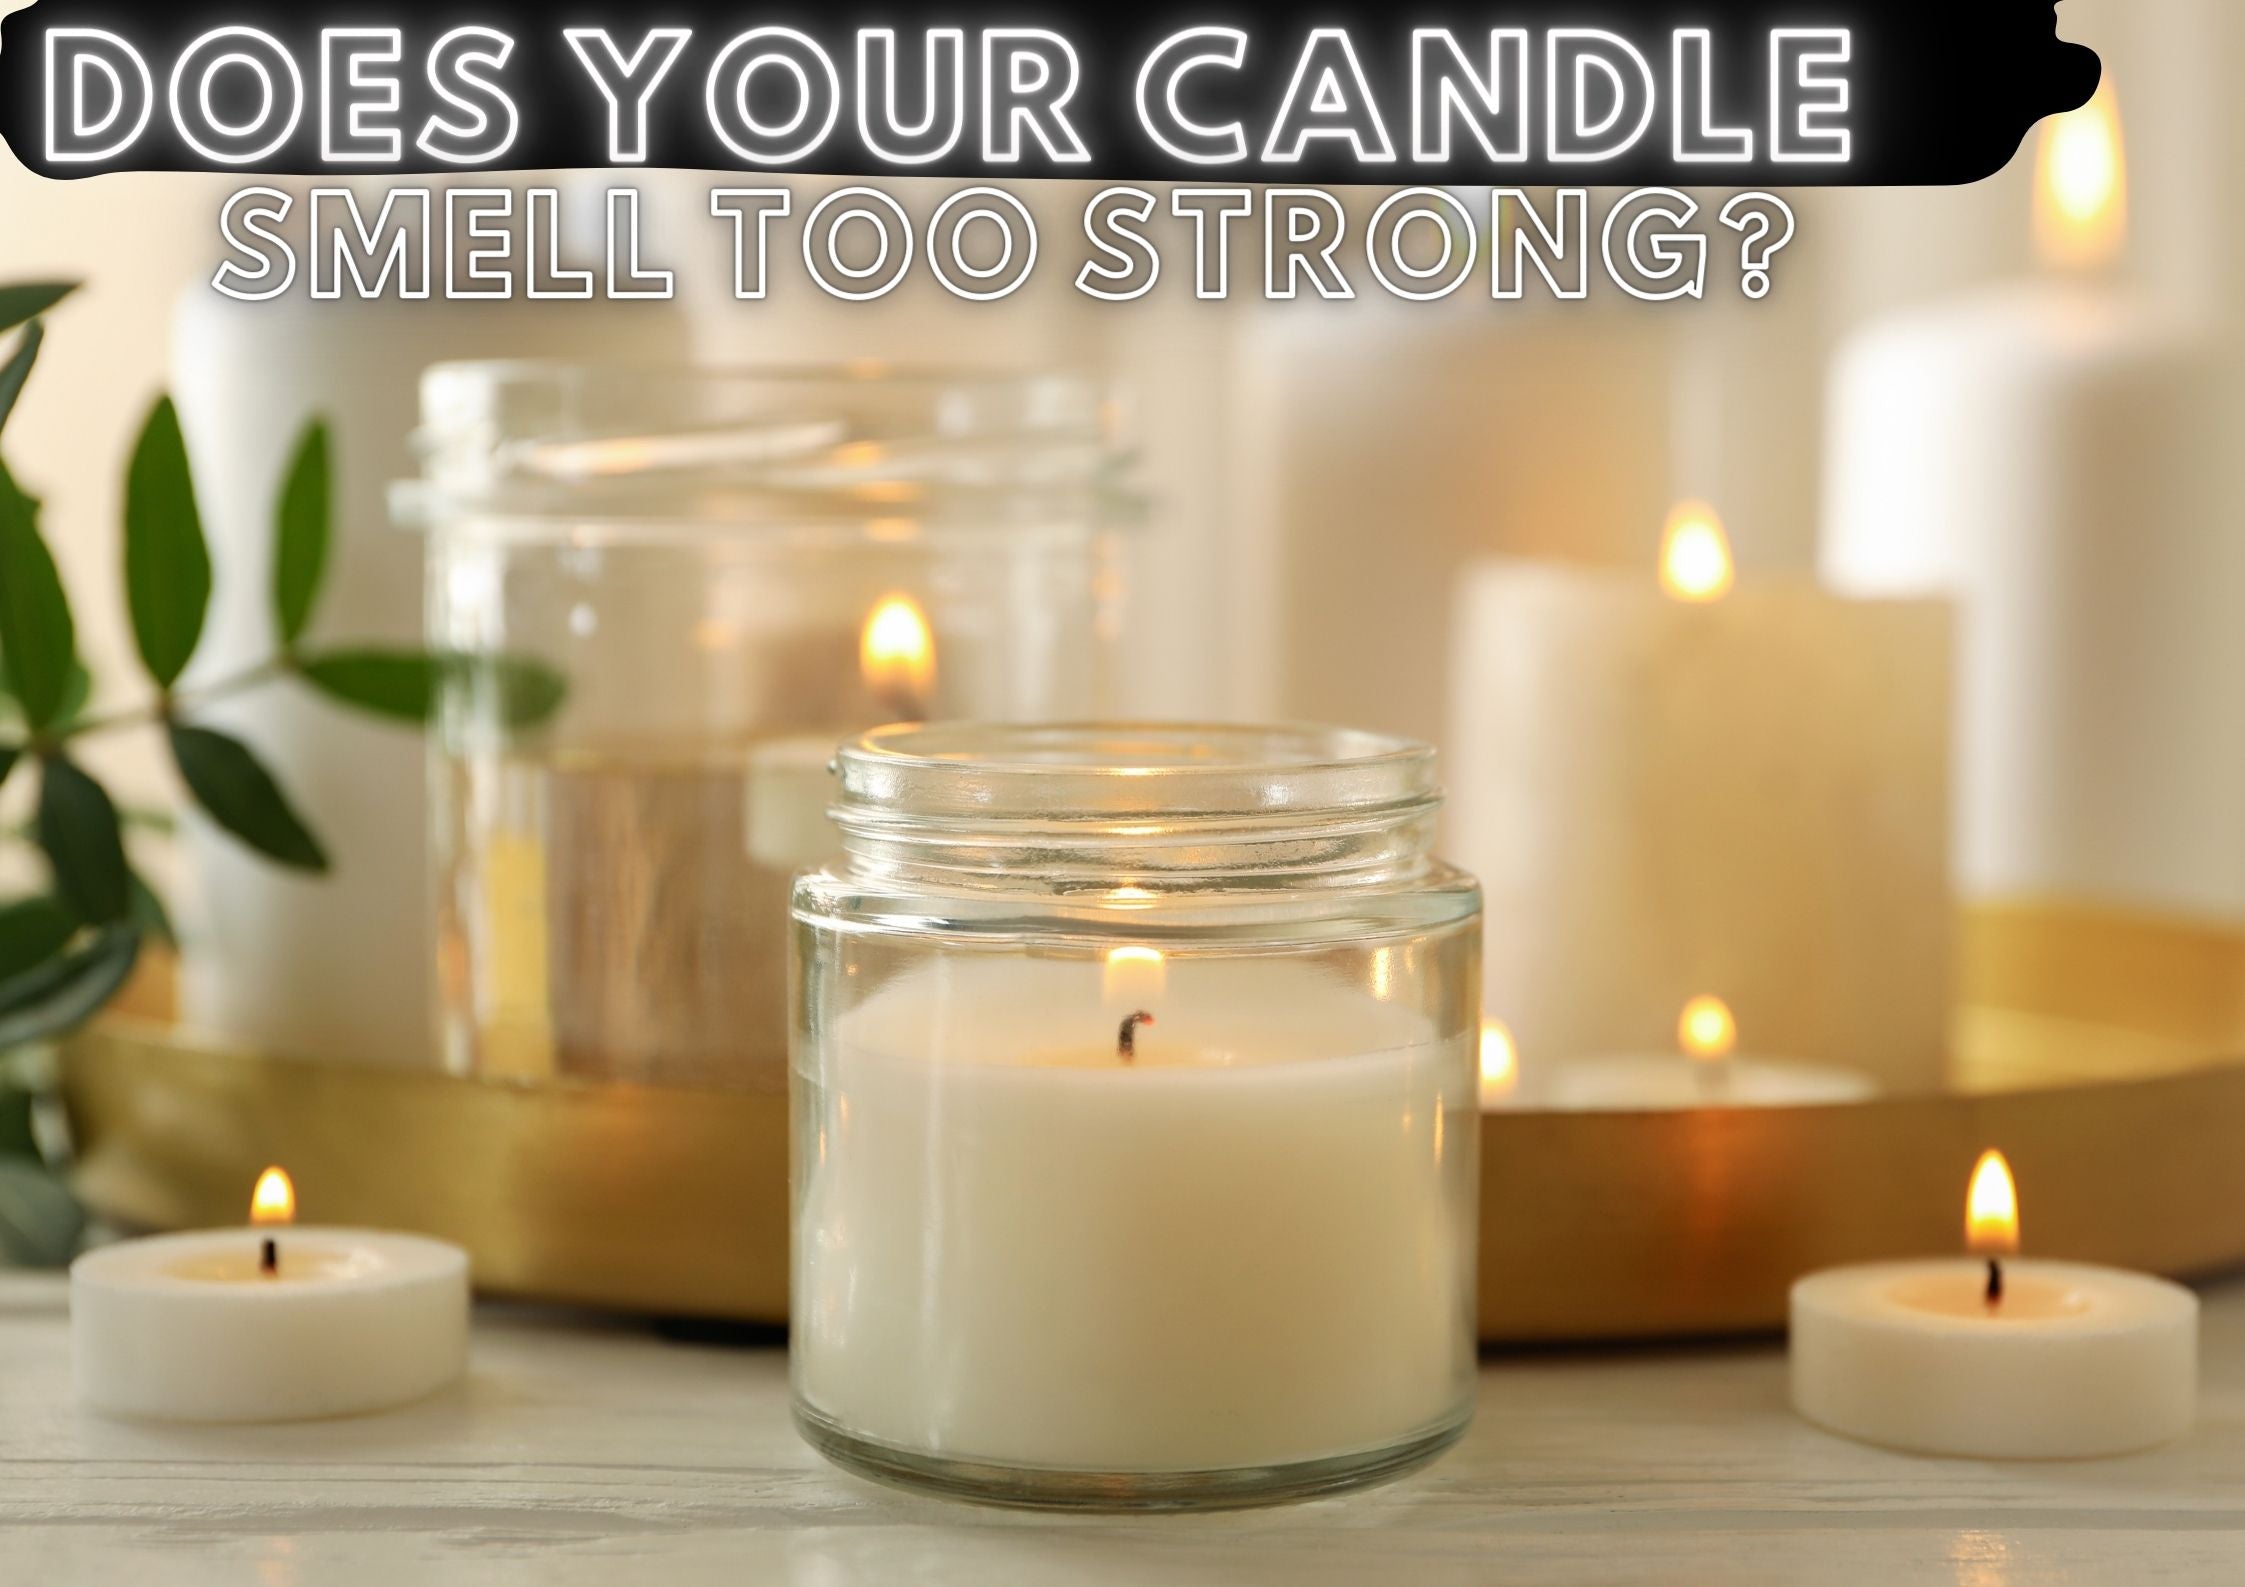 Candle smells too strong